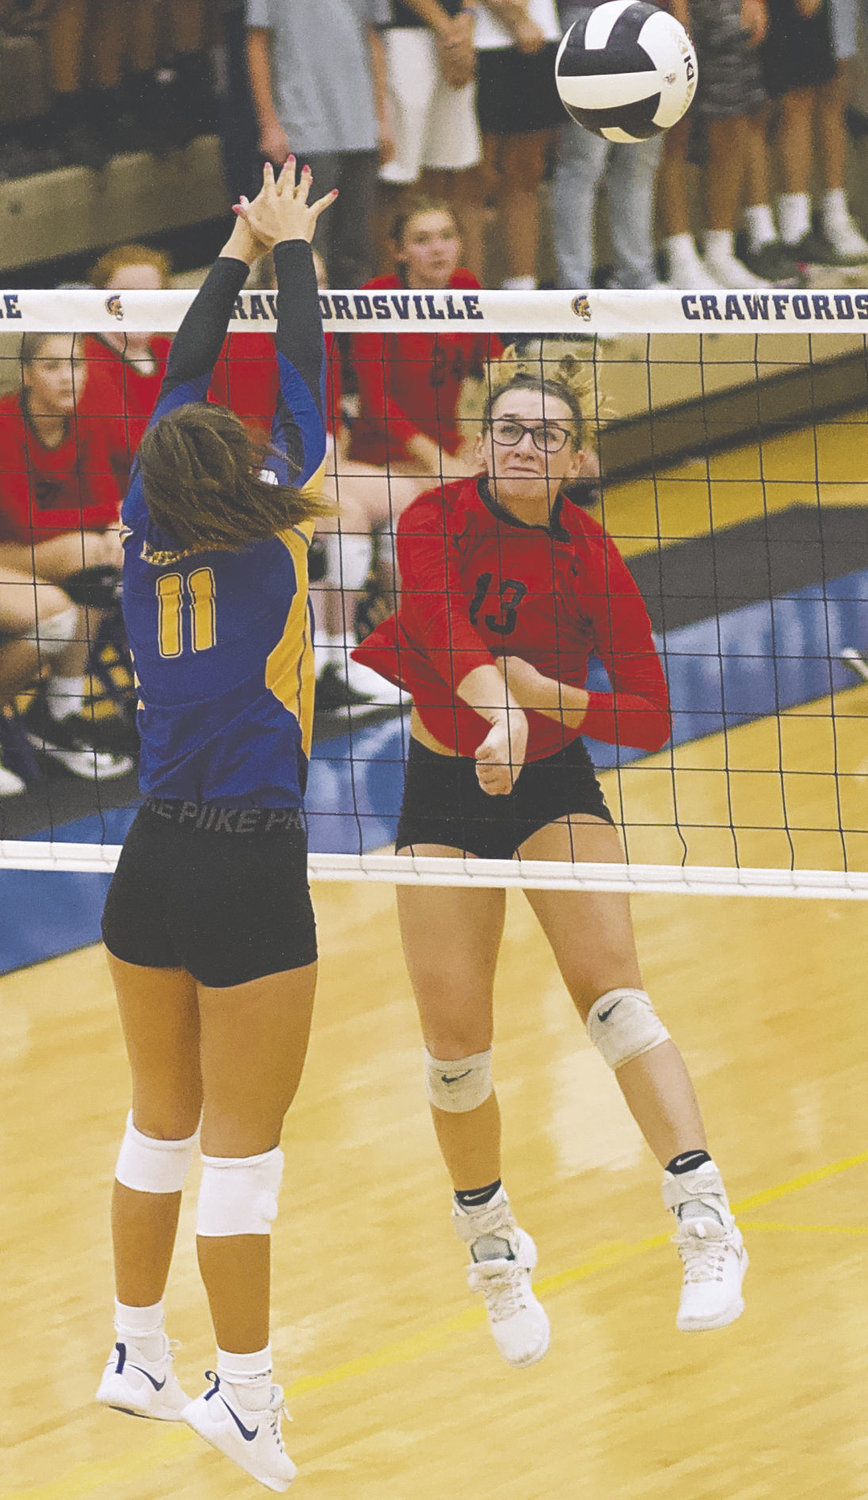 Southmont’s Kaley Remley hits over Crawfordsville’s AlyxBannon in a game earlier this season.